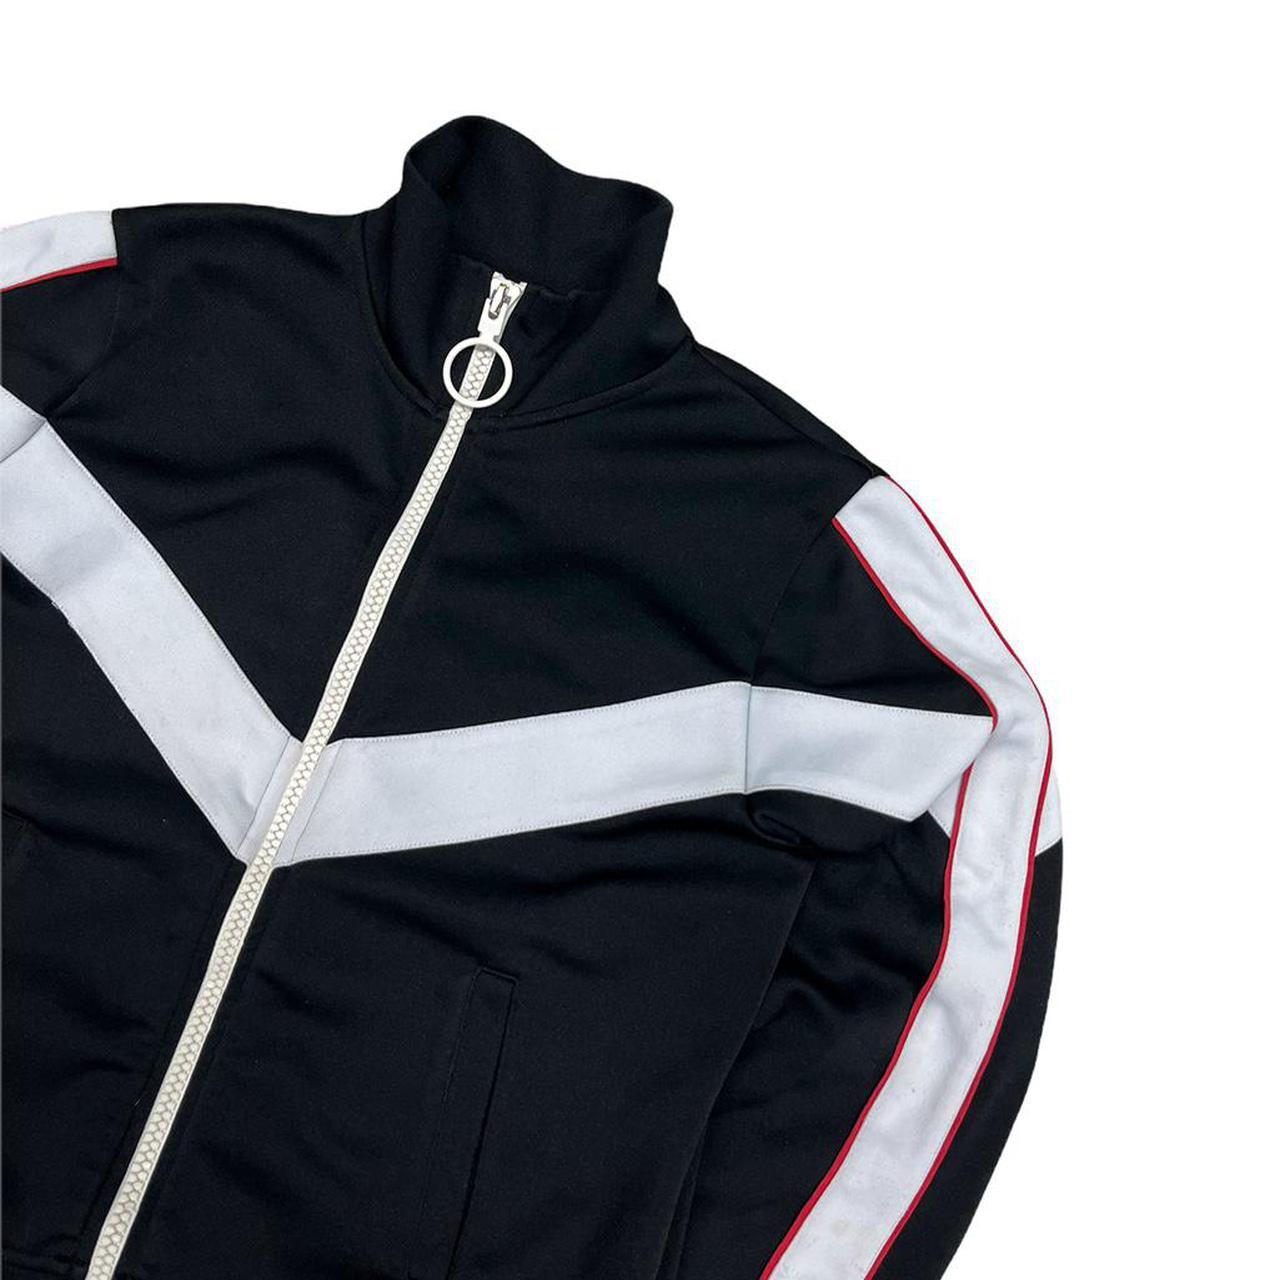 Off-white womens stripe track top - Known Source